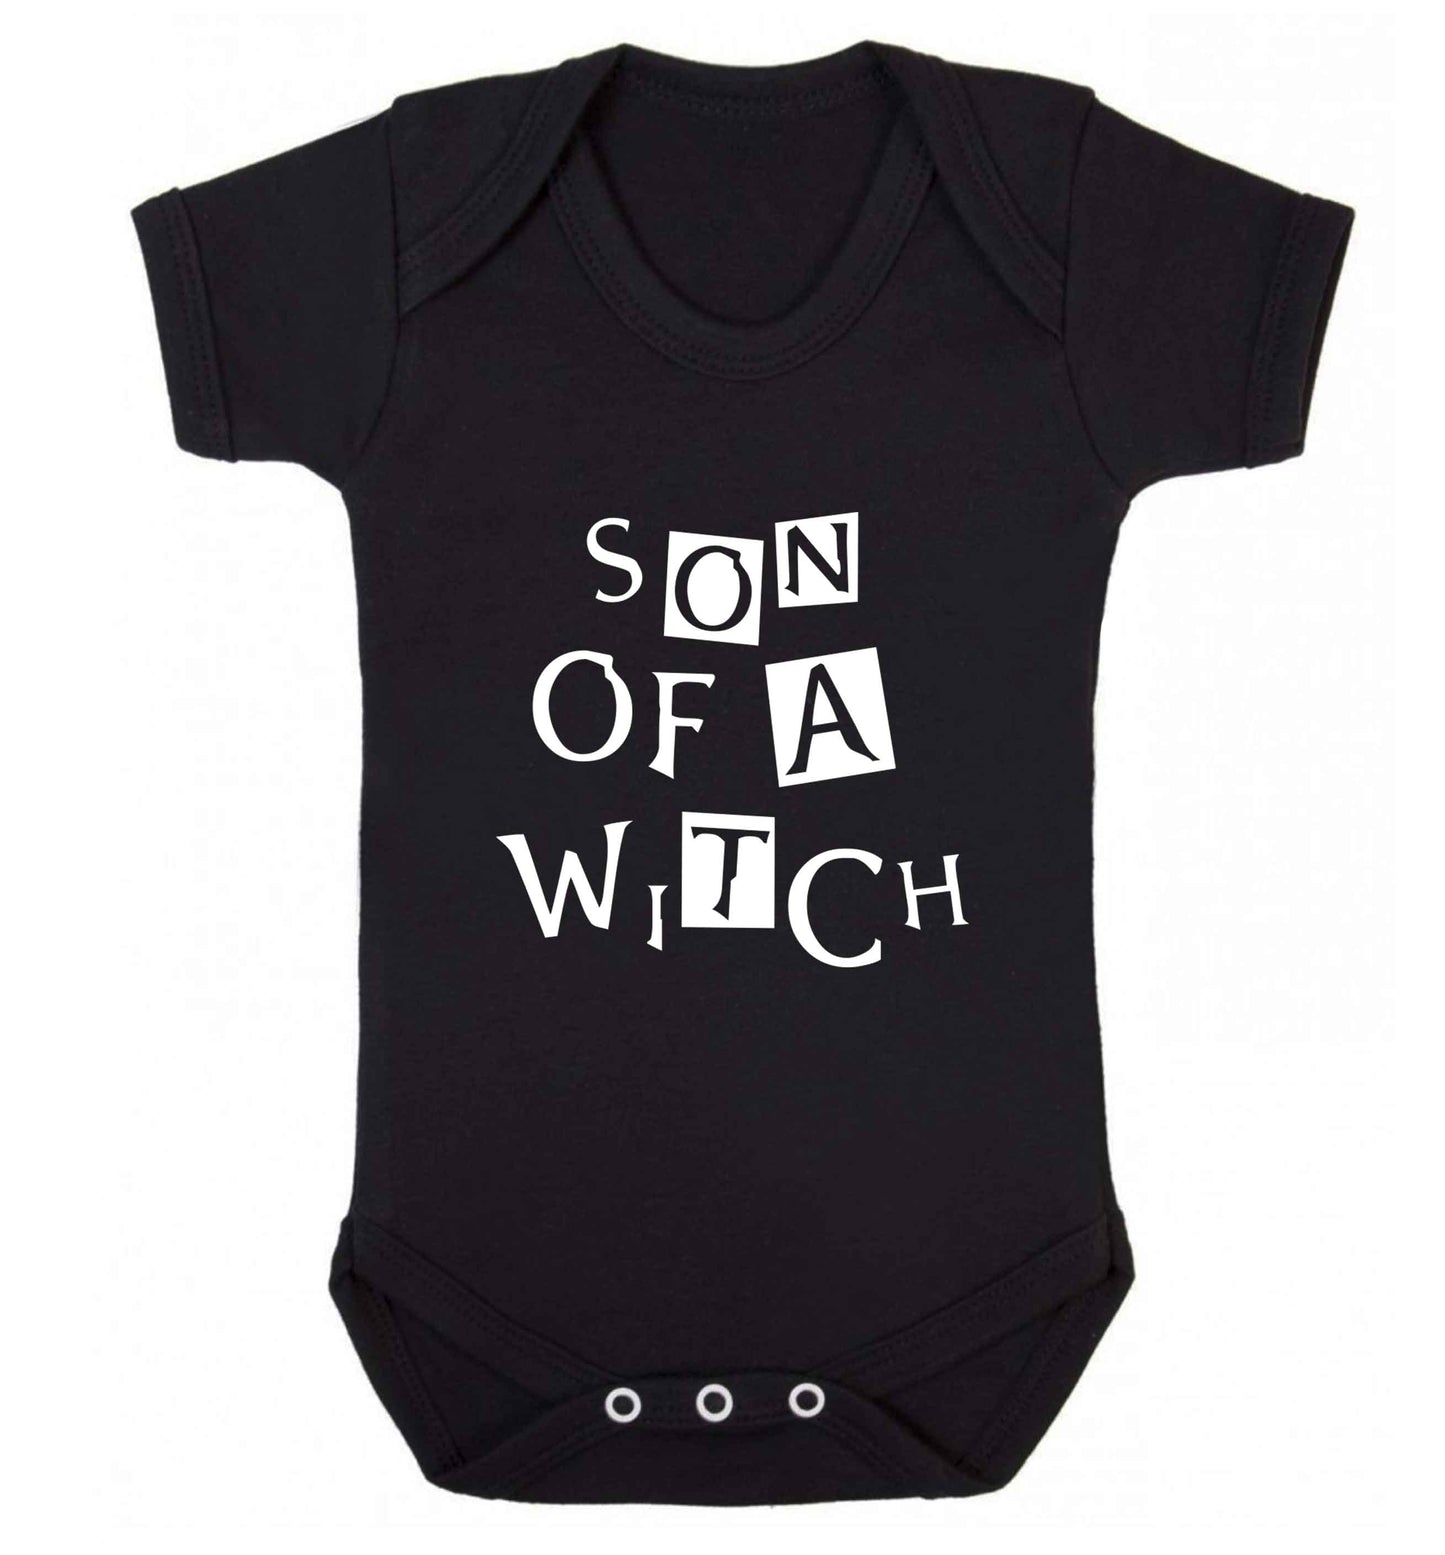 Son of a witch baby vest black 18-24 months